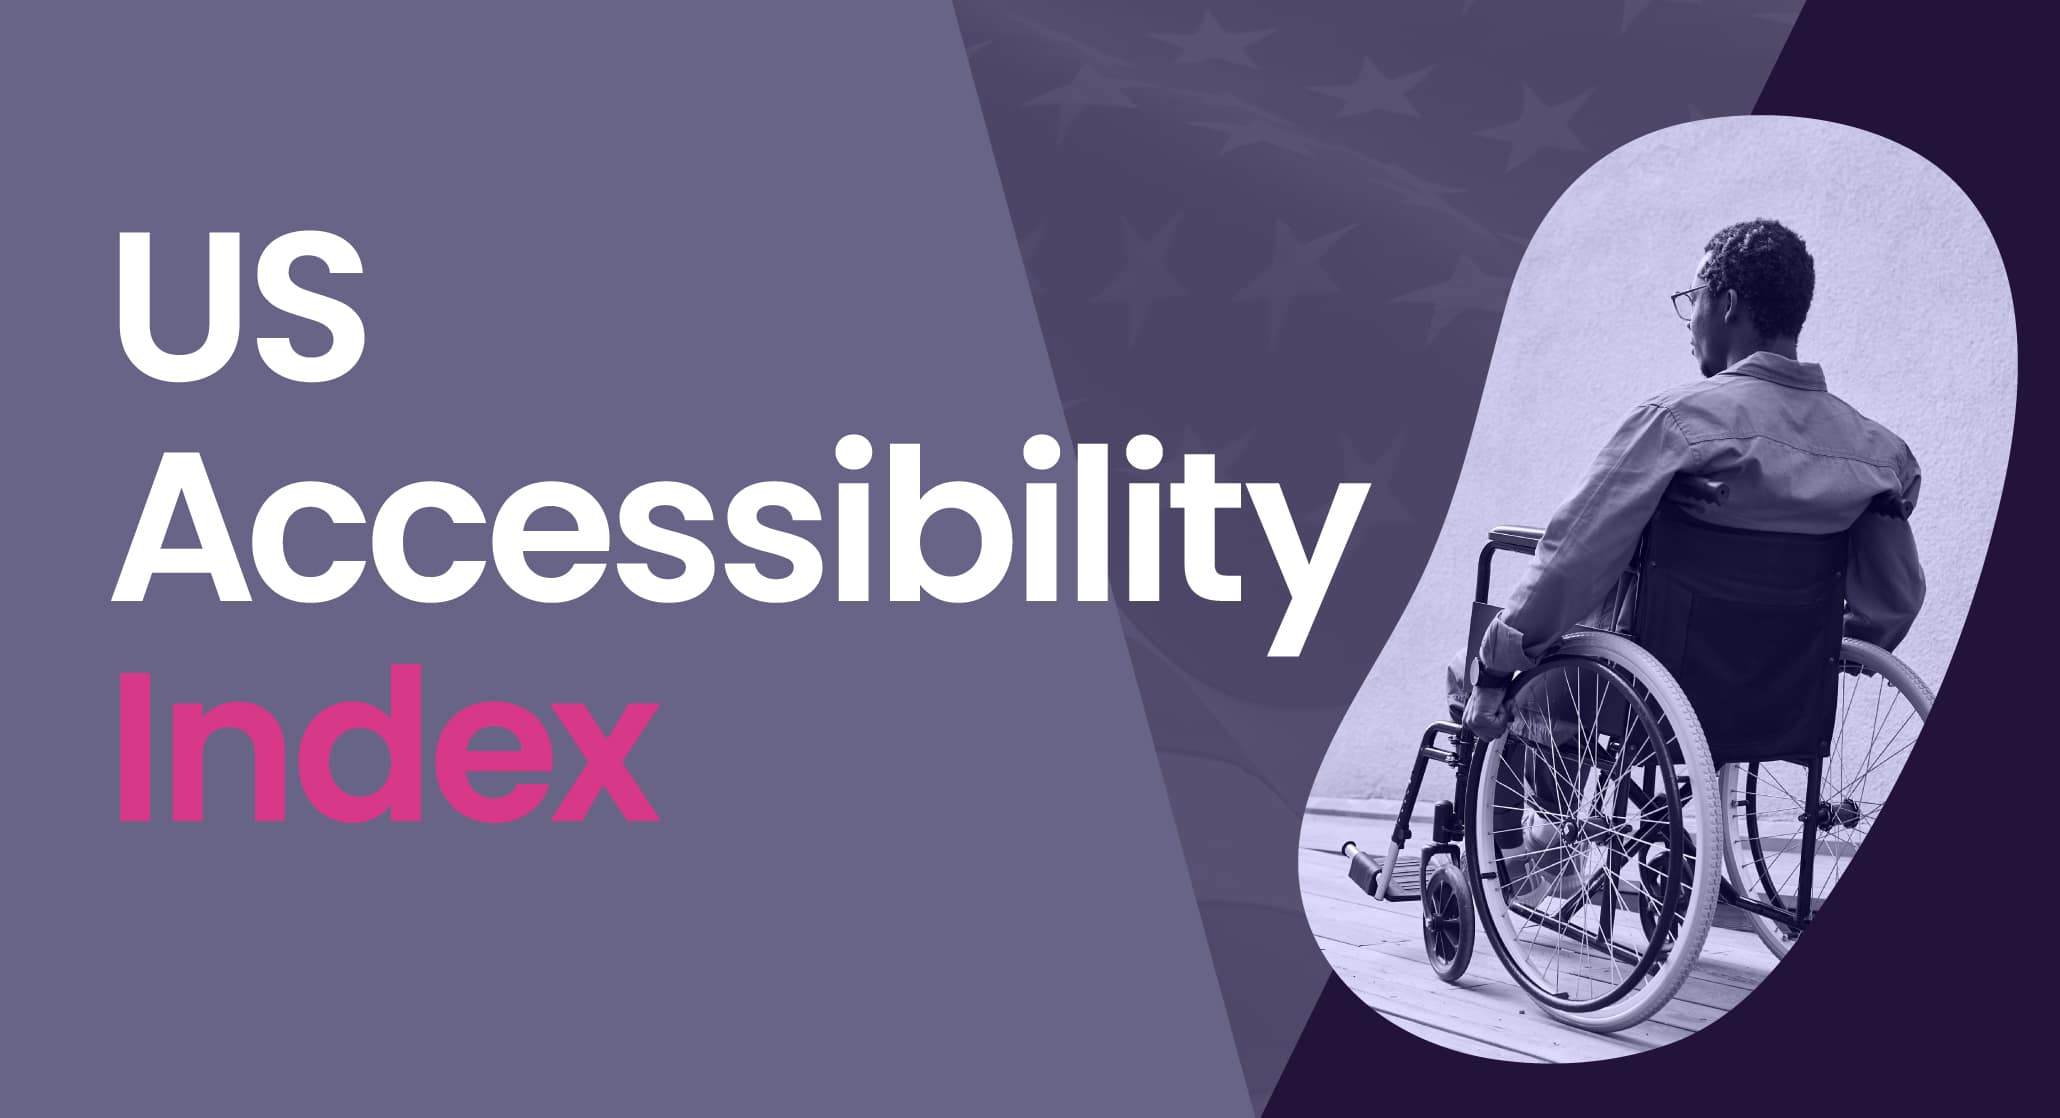 A person in a wheelchair with the text "Auto Draft US Accessibility Index" indicating a focus on accessibility in the United States.